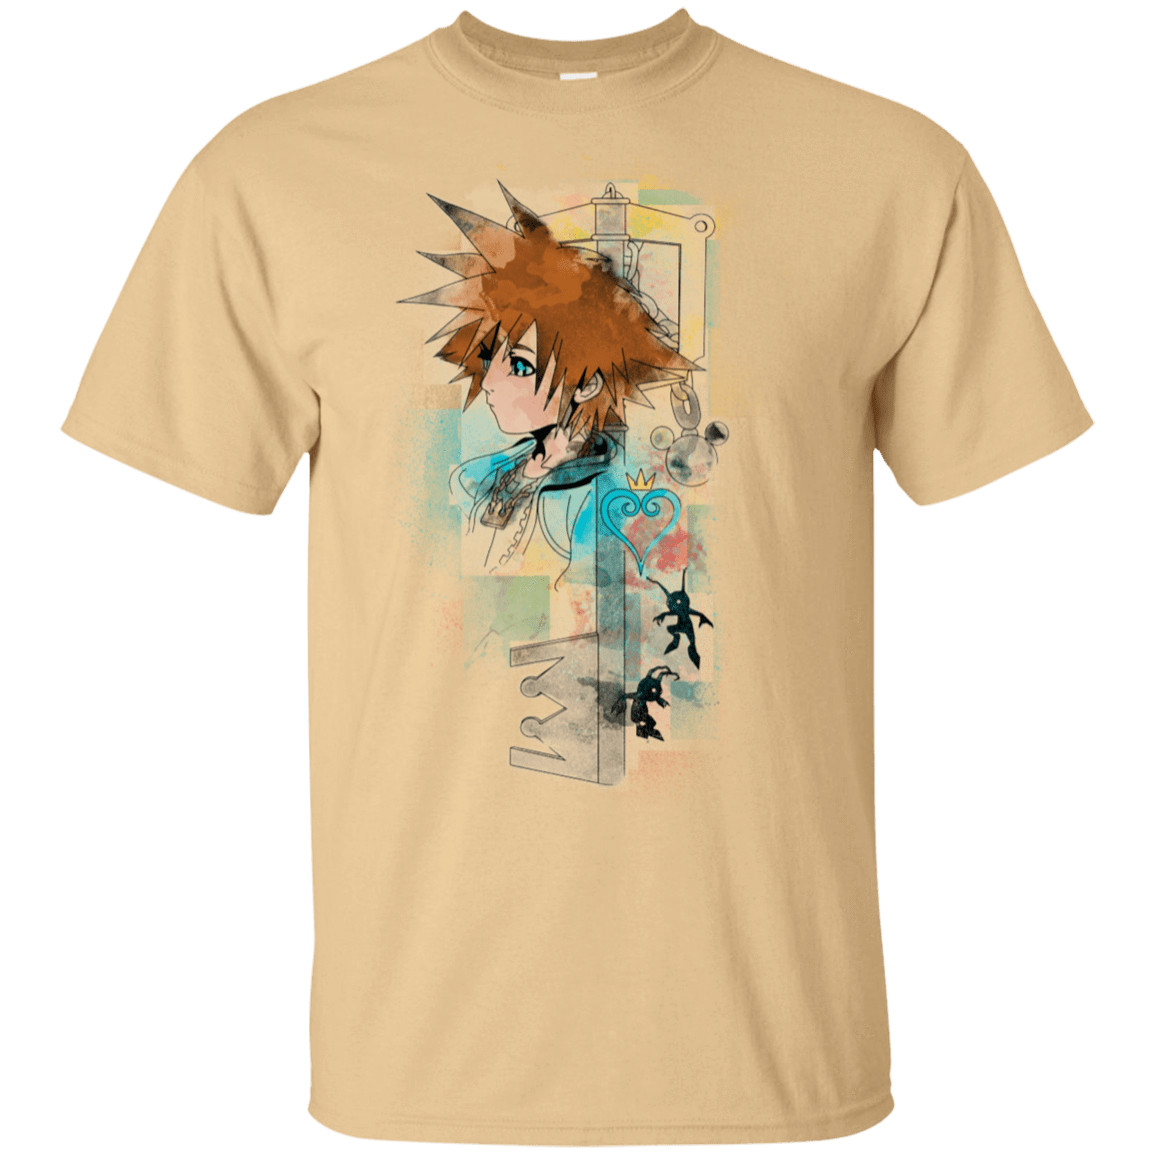 T-Shirts Vegas Gold / S Kingdom of Water Colors T-Shirt